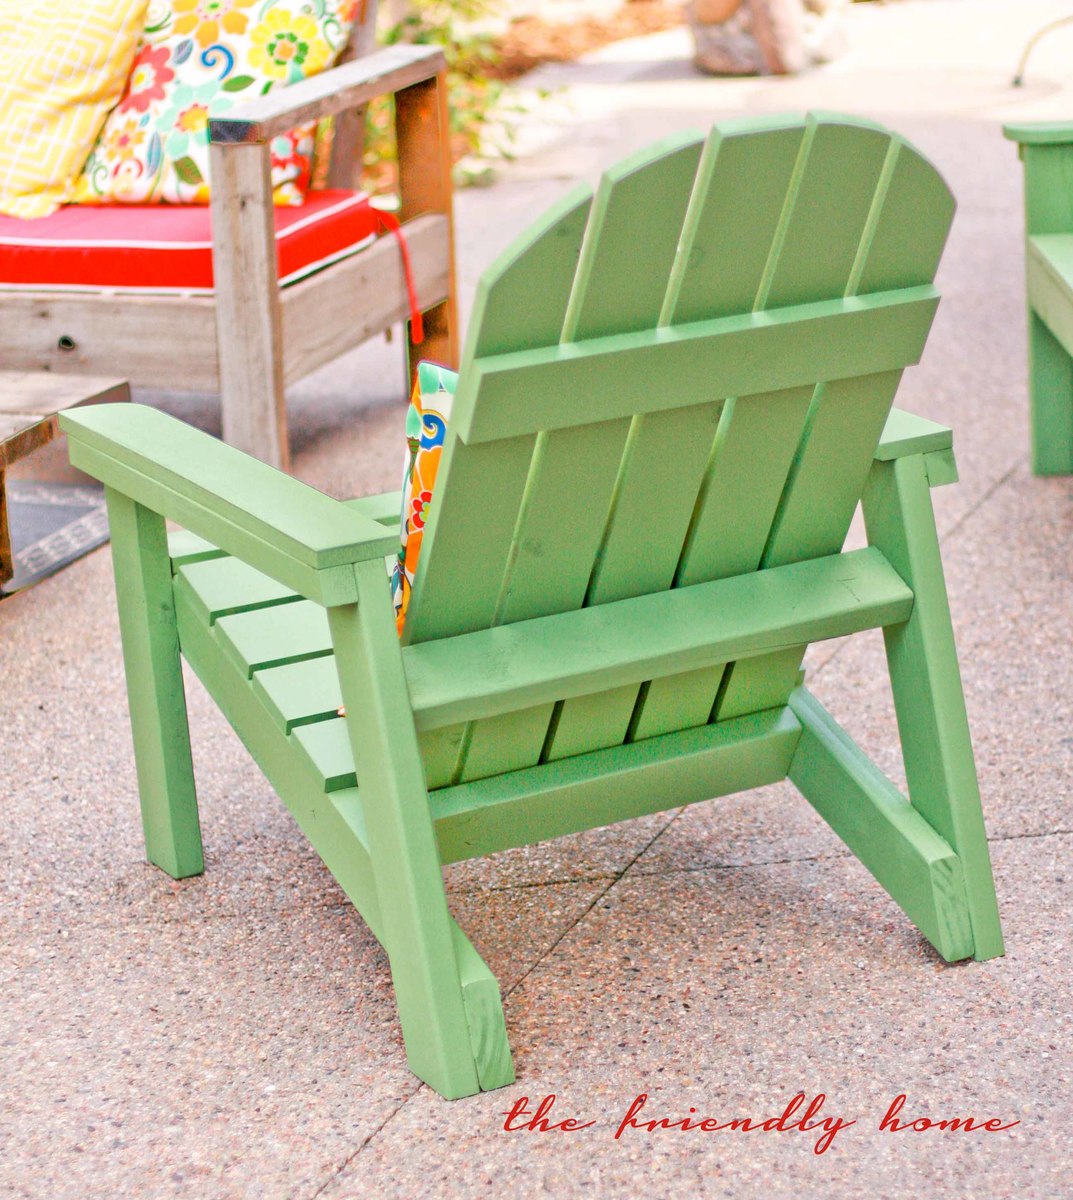 These are great chairs! Easy to build, comfy to sit in. Check out my 